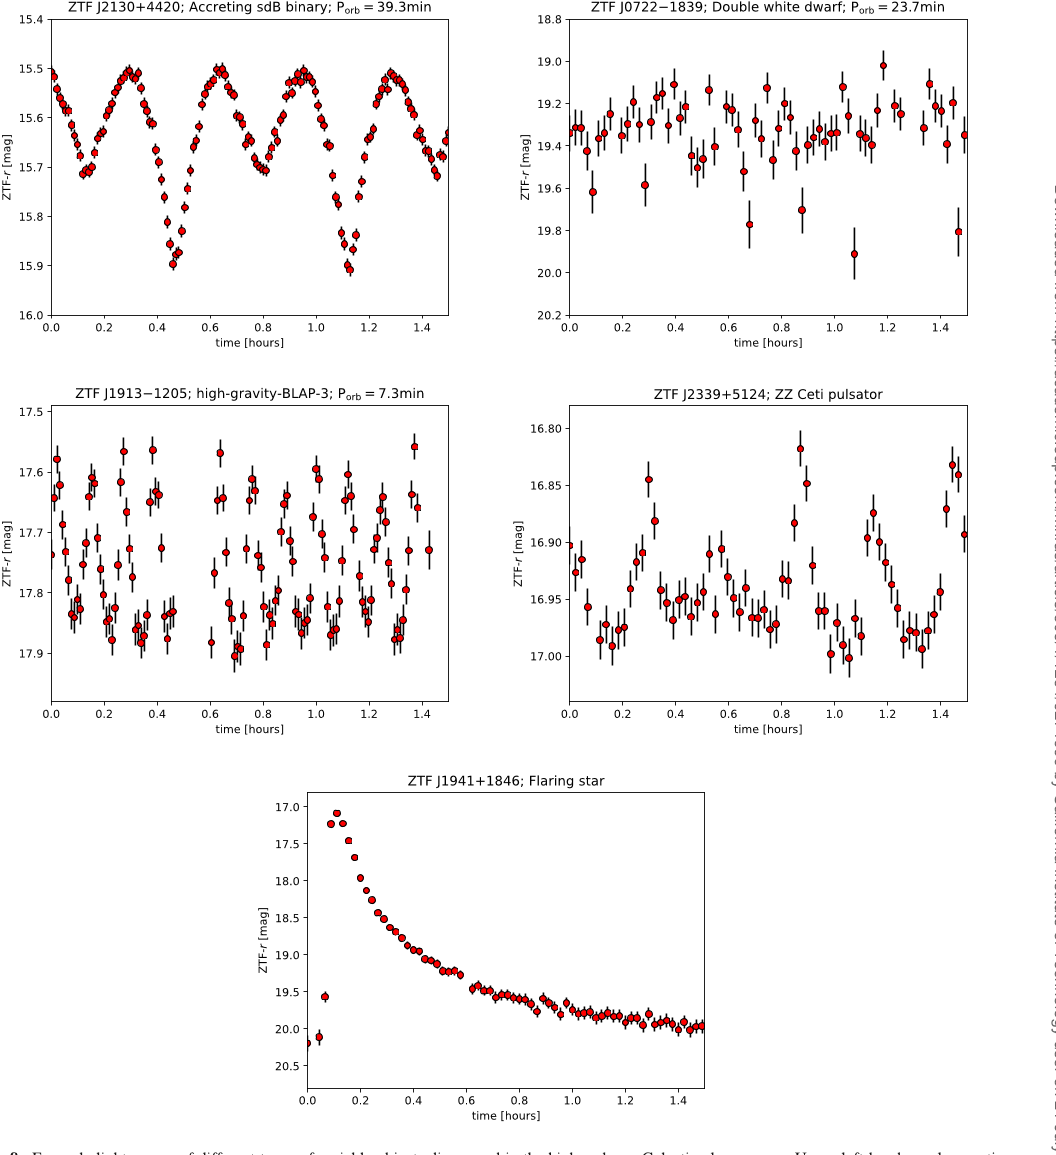 Figure 8. Example light curves of different types of variable objects discovered in the high-cadence Galactic plane survey. Upper left-hand panel: accreting sdB binary (Kupfer et al. 2020a). Upper right-hand panel: eclipsing double white dwarf (Burdge et al. 2020a). Middle left-hand panel: compact radial mode pulsator (Kupfer et al. 2019b). Middle right-hand panel: ZZ Ceti pulsator (Guidry et al. 2020). Lowest panel: flaring star.